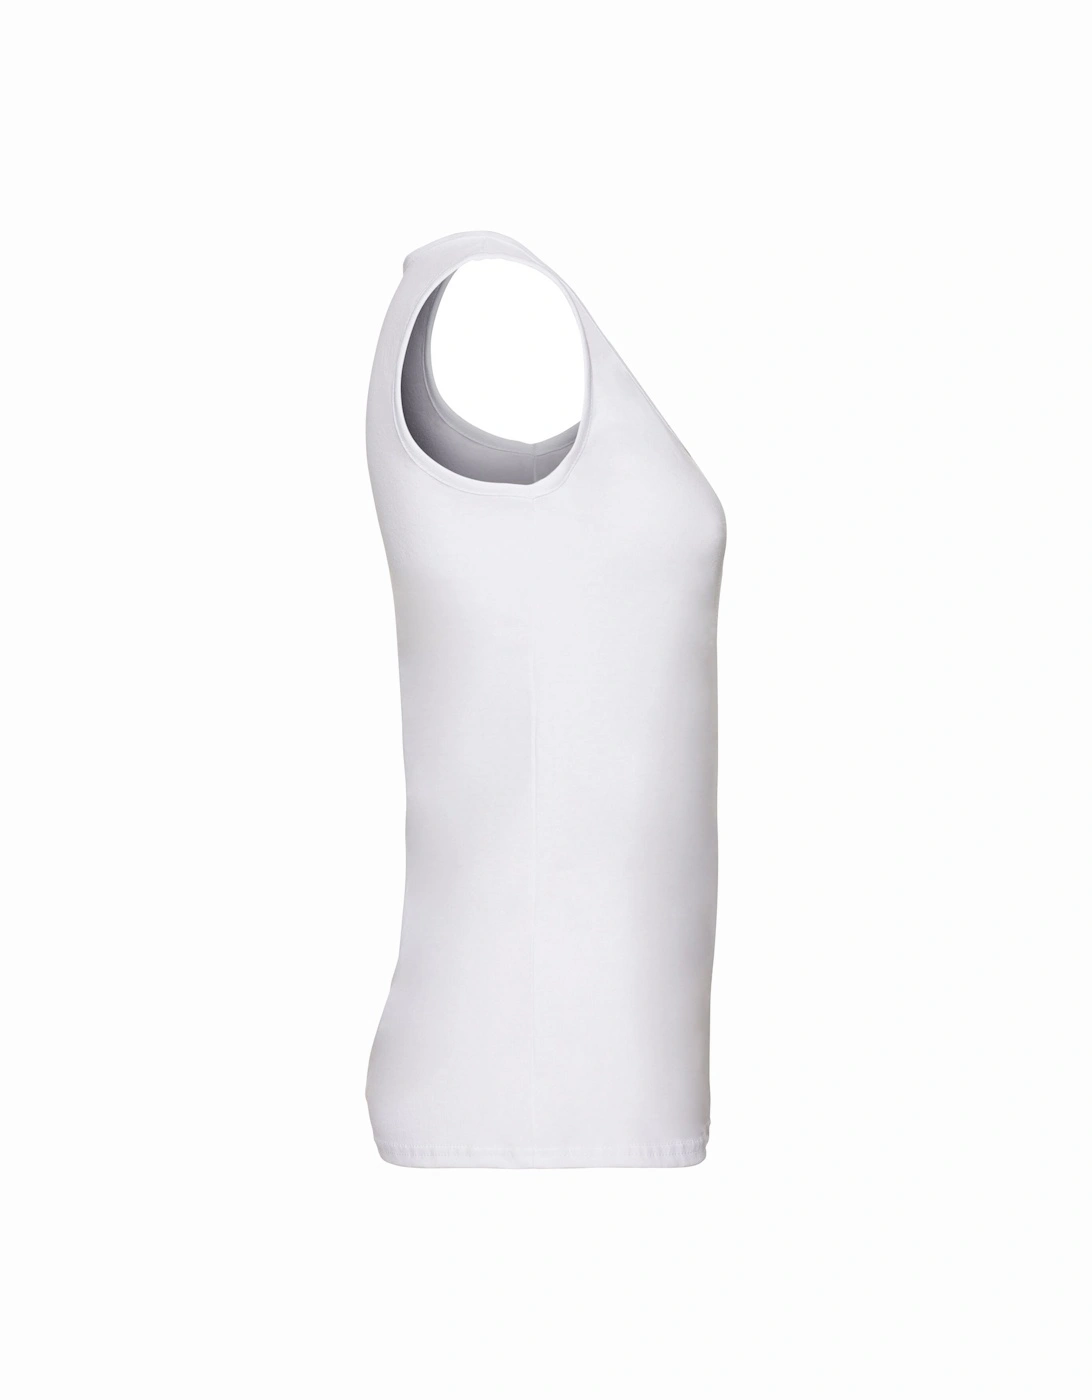 Womens/Ladies Valueweight Lady Fit Vest Top